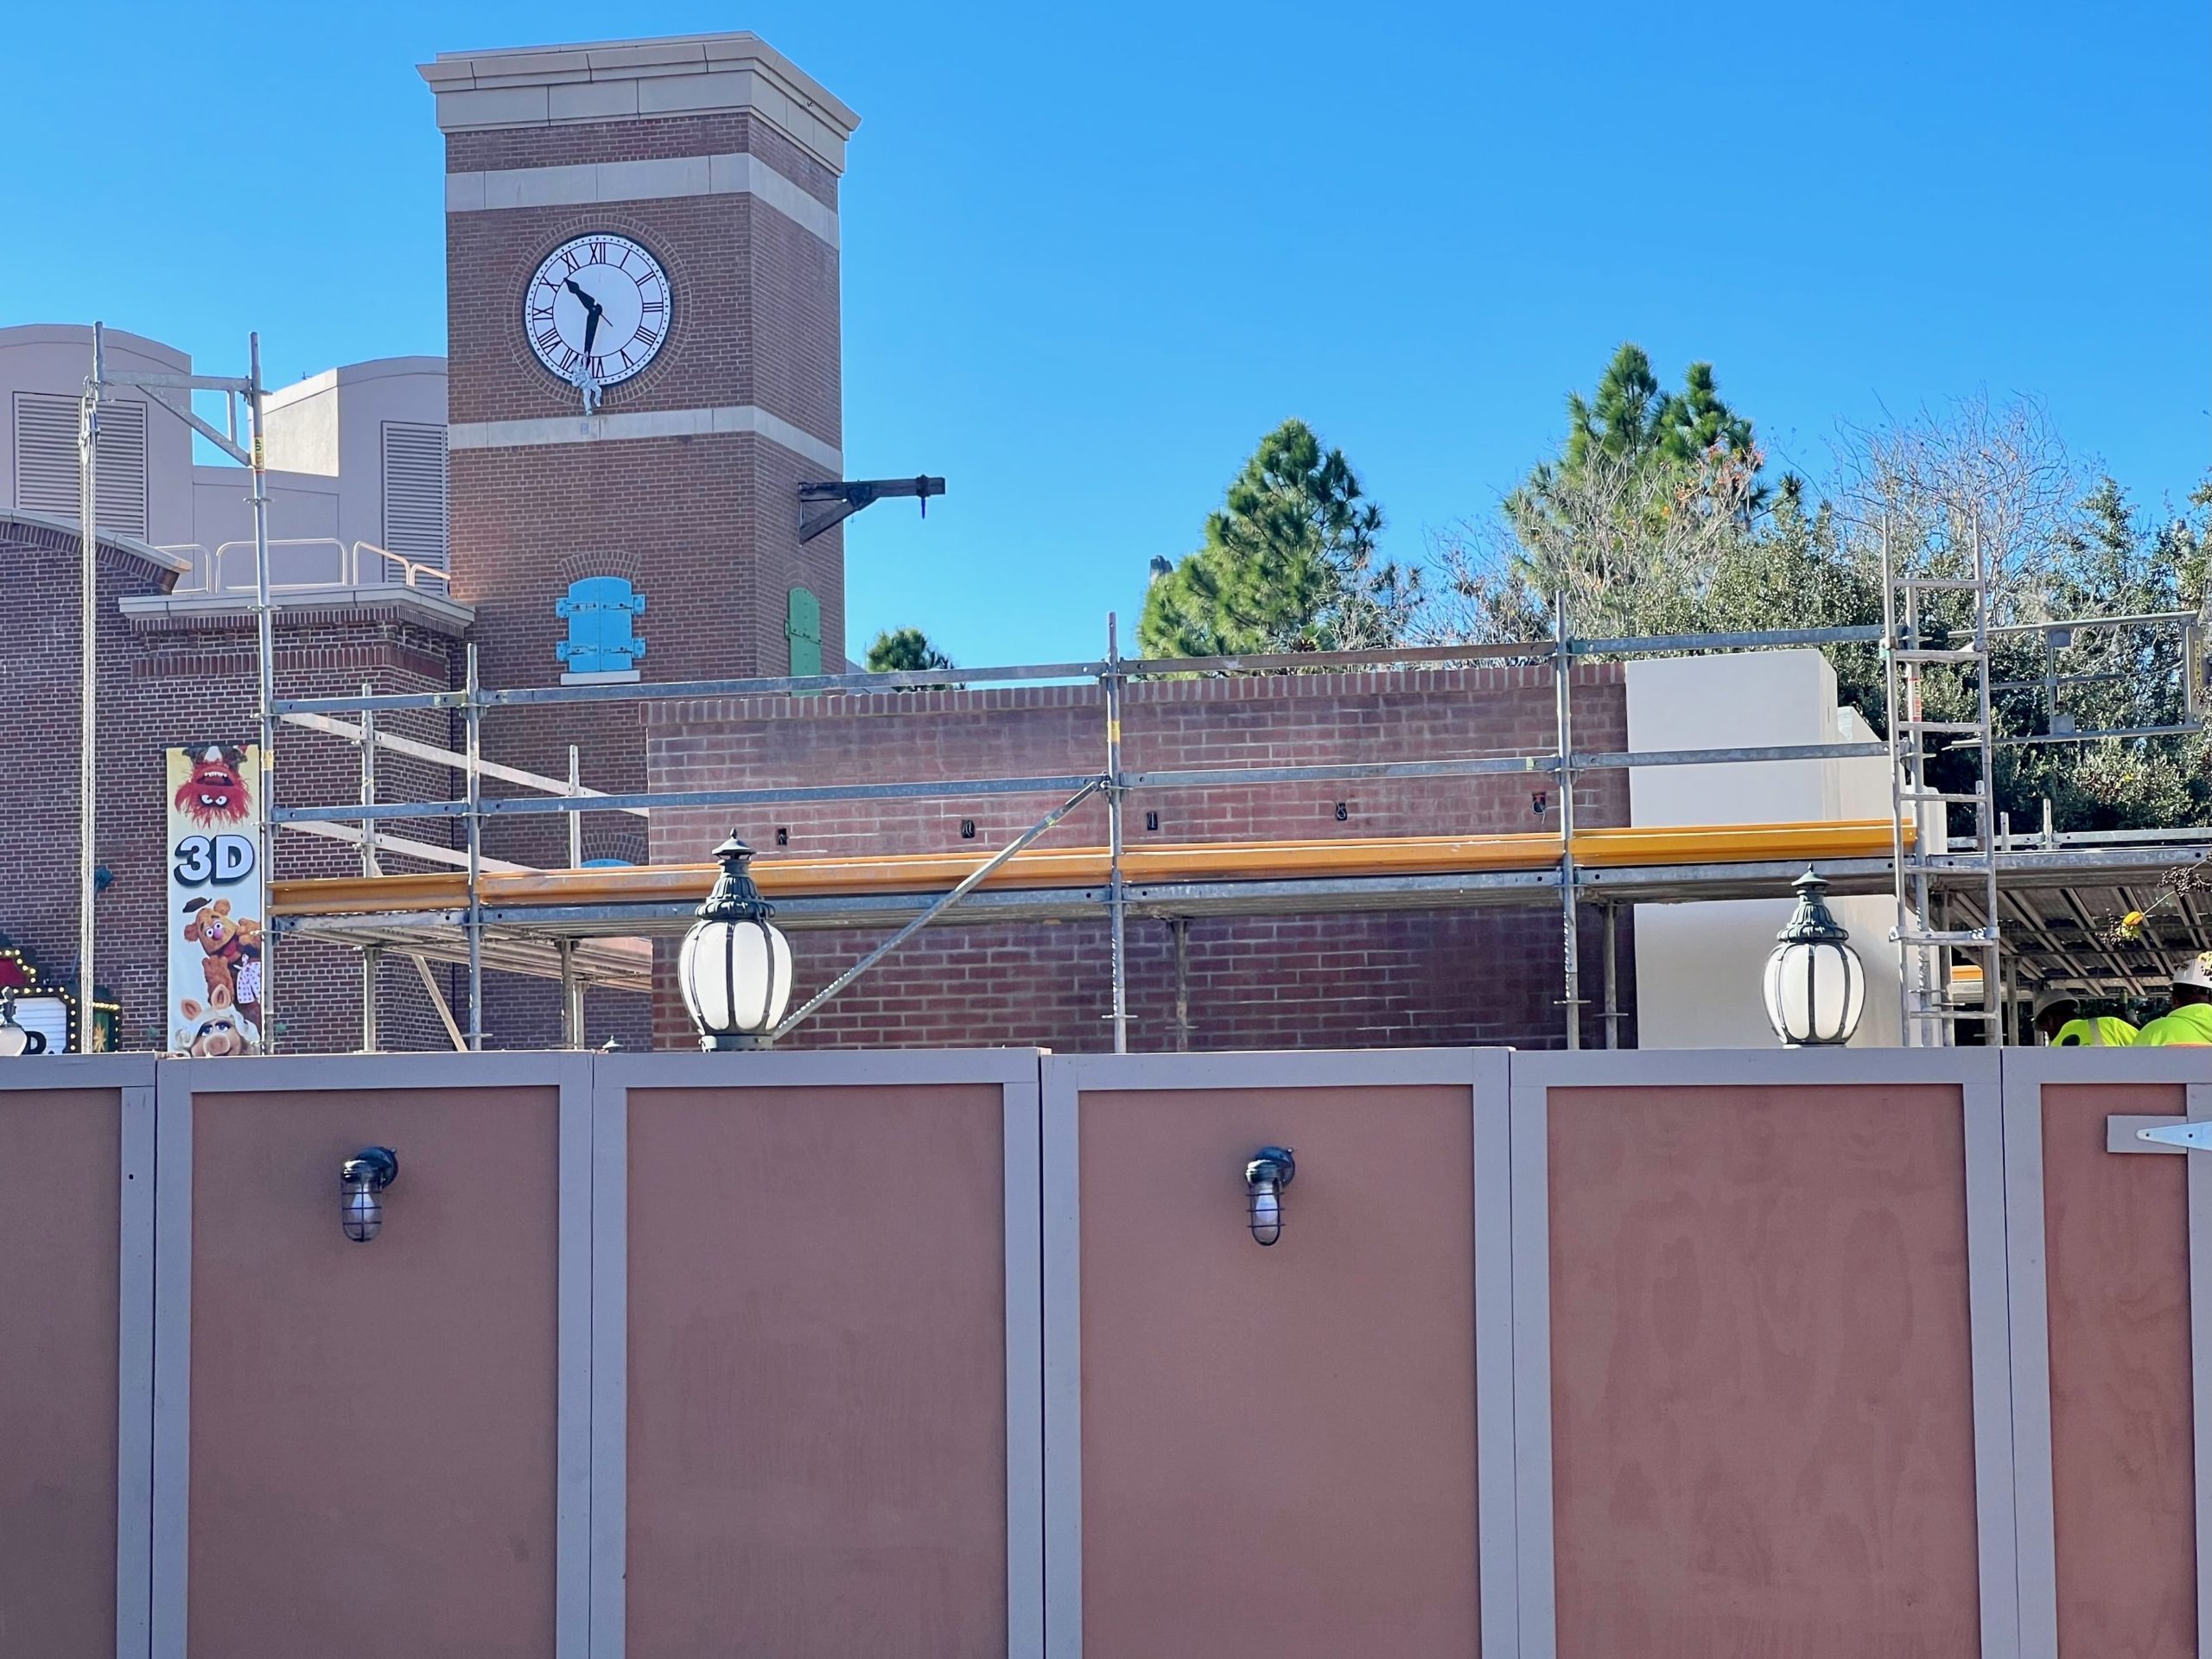 Mystery Structure at Muppets Courtyard DHS